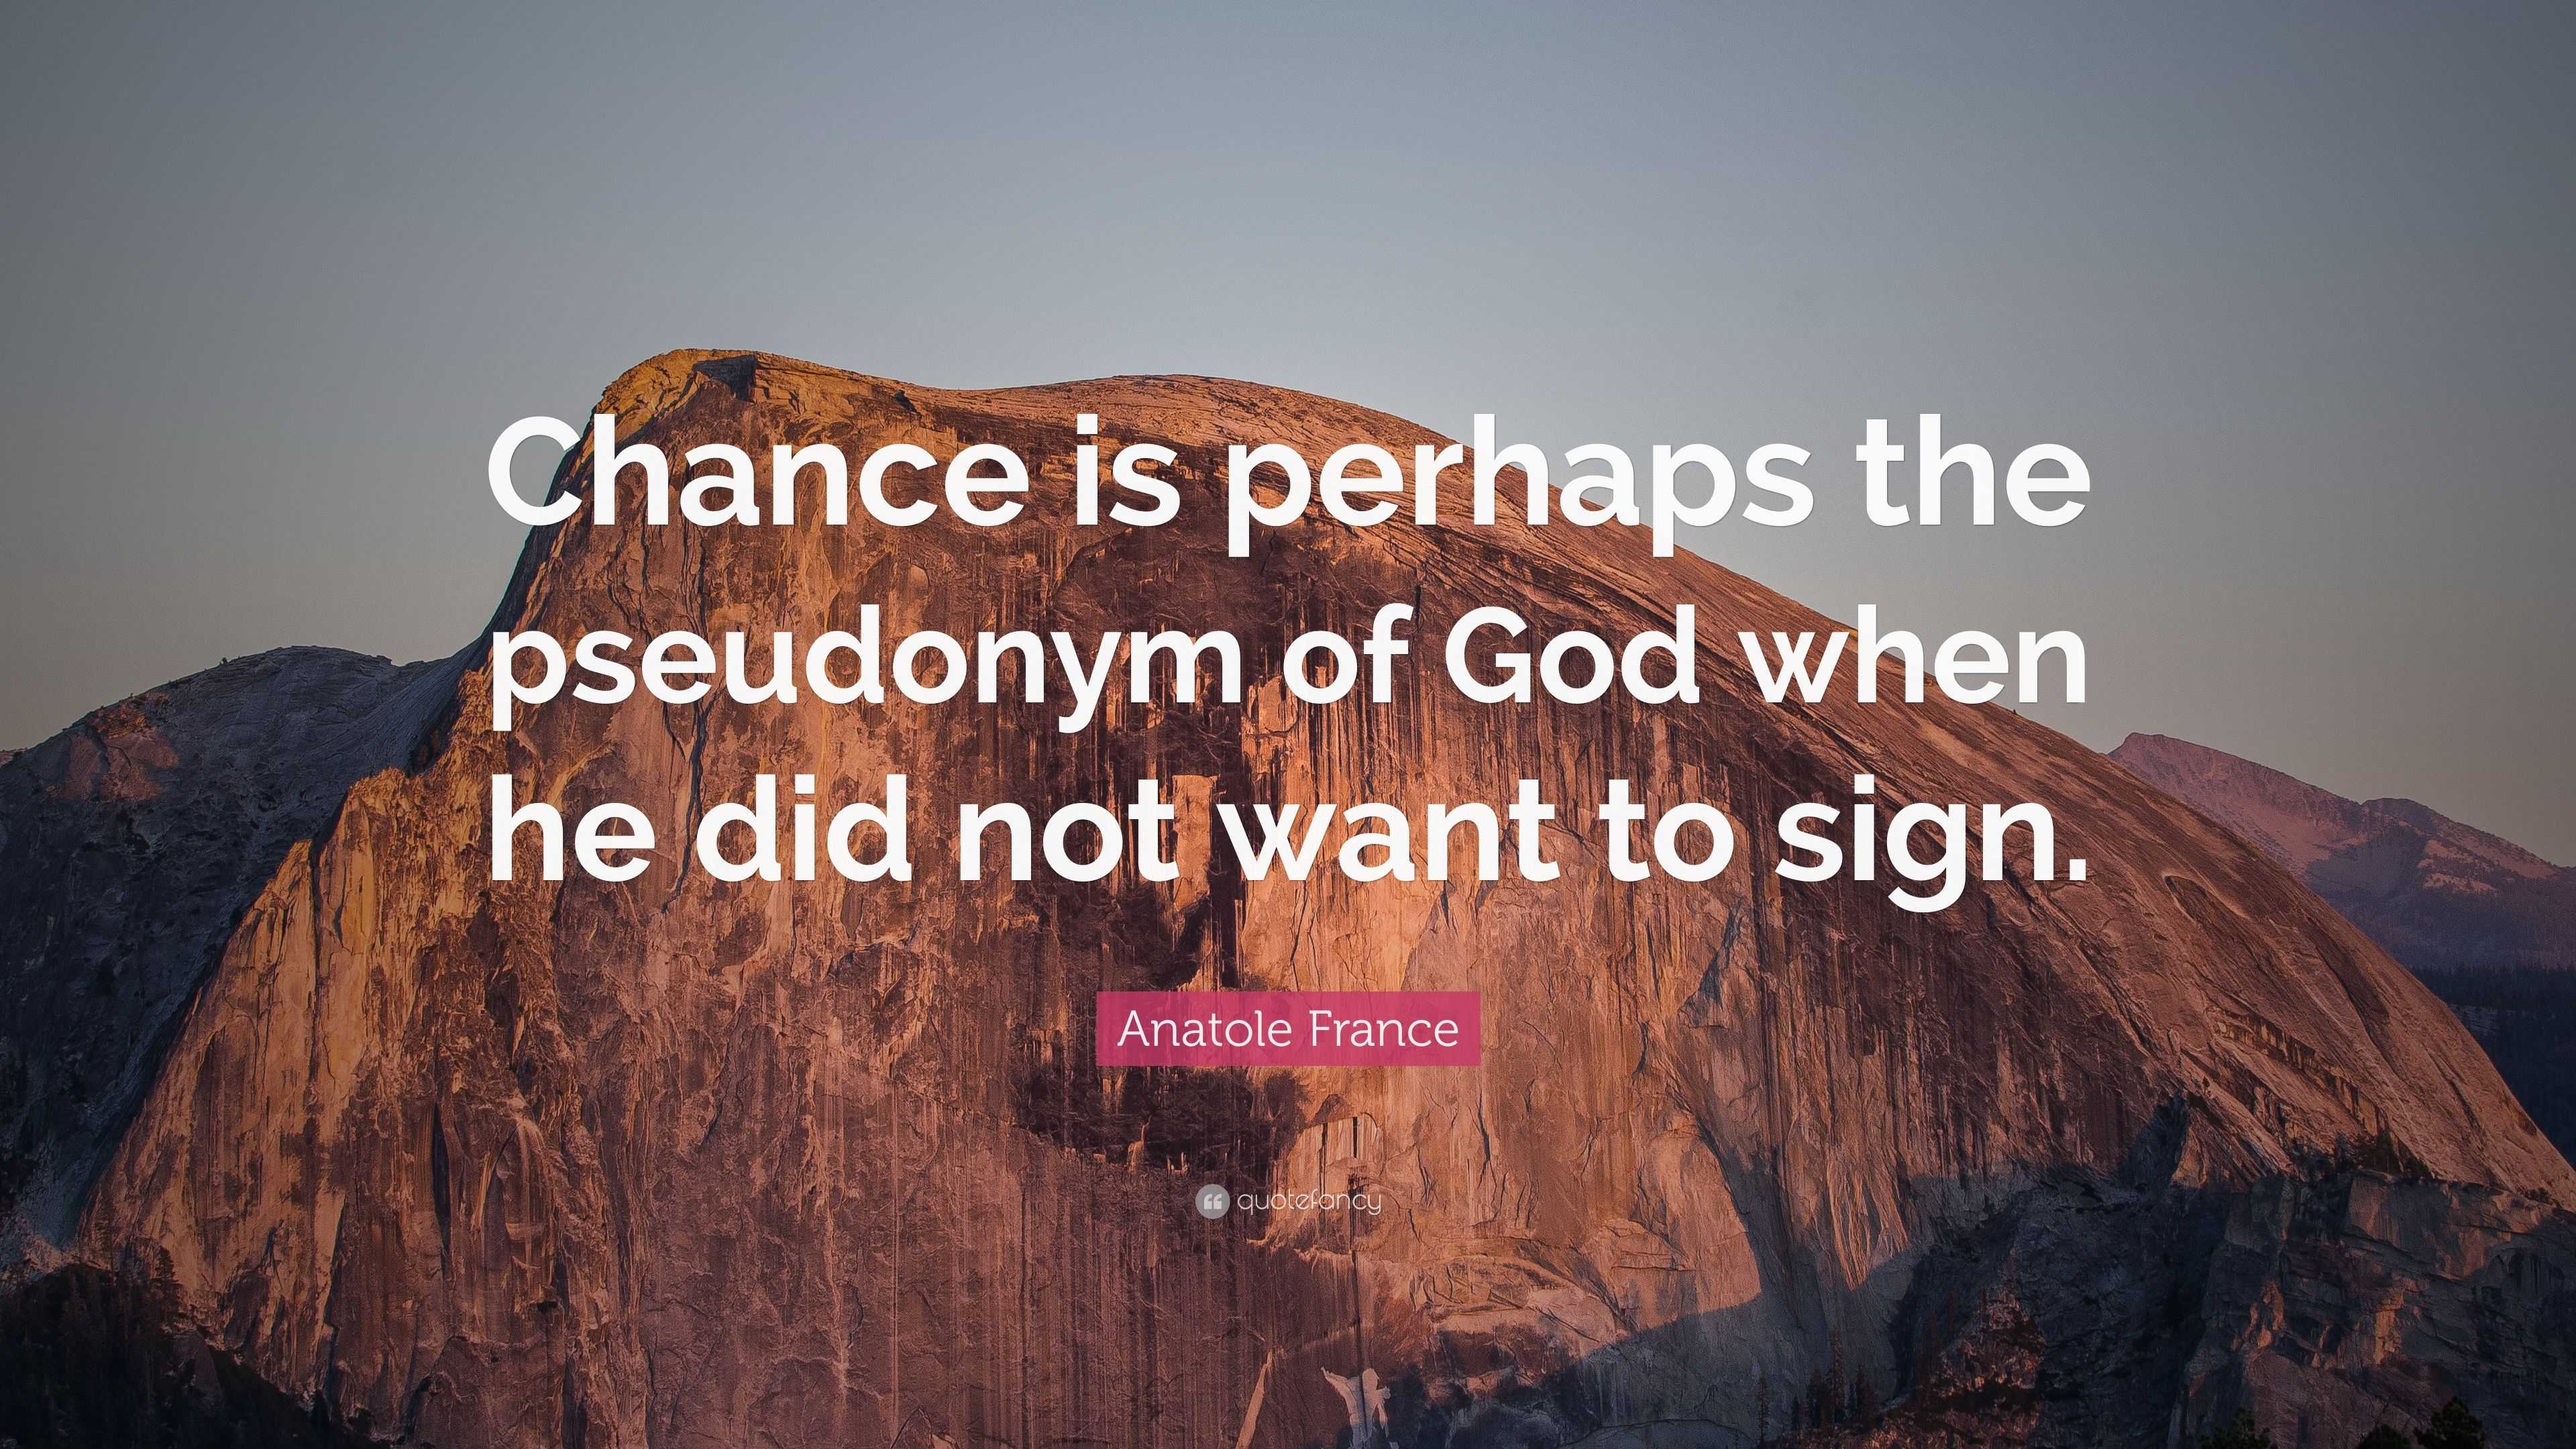 Anatole France Quote “Chance is perhaps the pseudonym of God when he